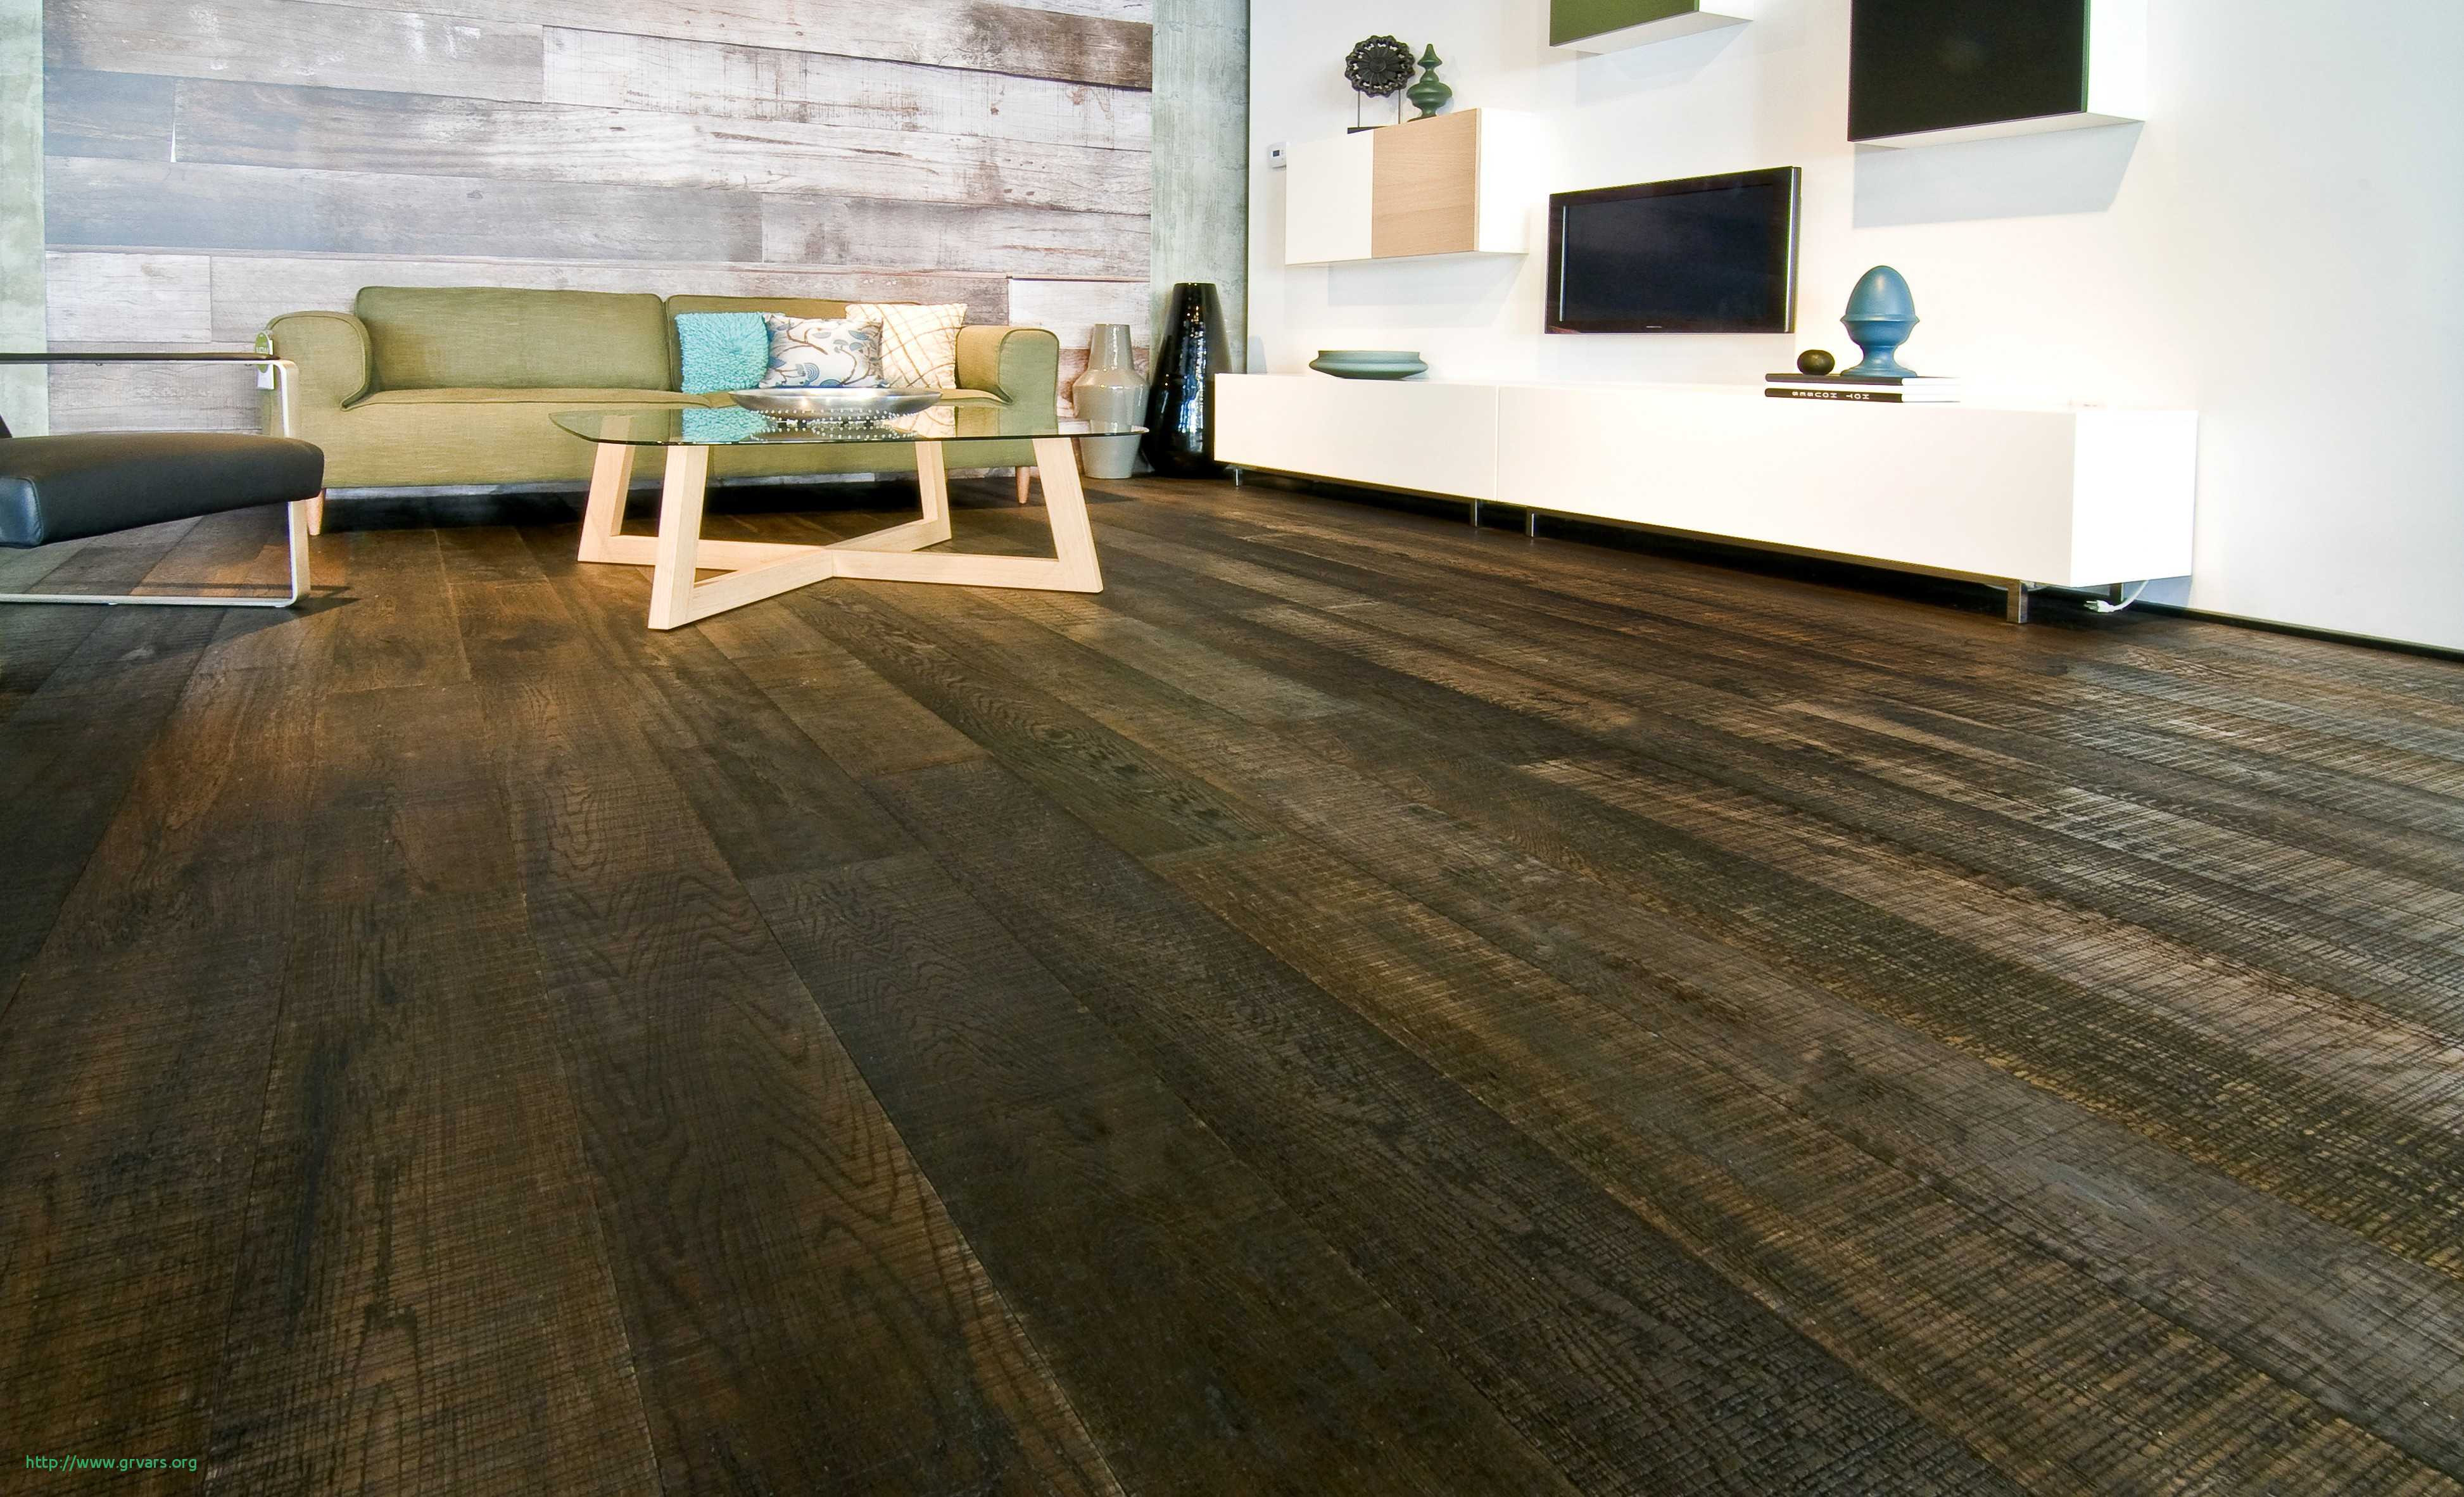 hardwood flooring cheap prices of what is the price floor luxe engaging discount hardwood flooring 5 intended for what is the price floor luxe engaging discount hardwood flooring 5 where to buy inspirational 0d